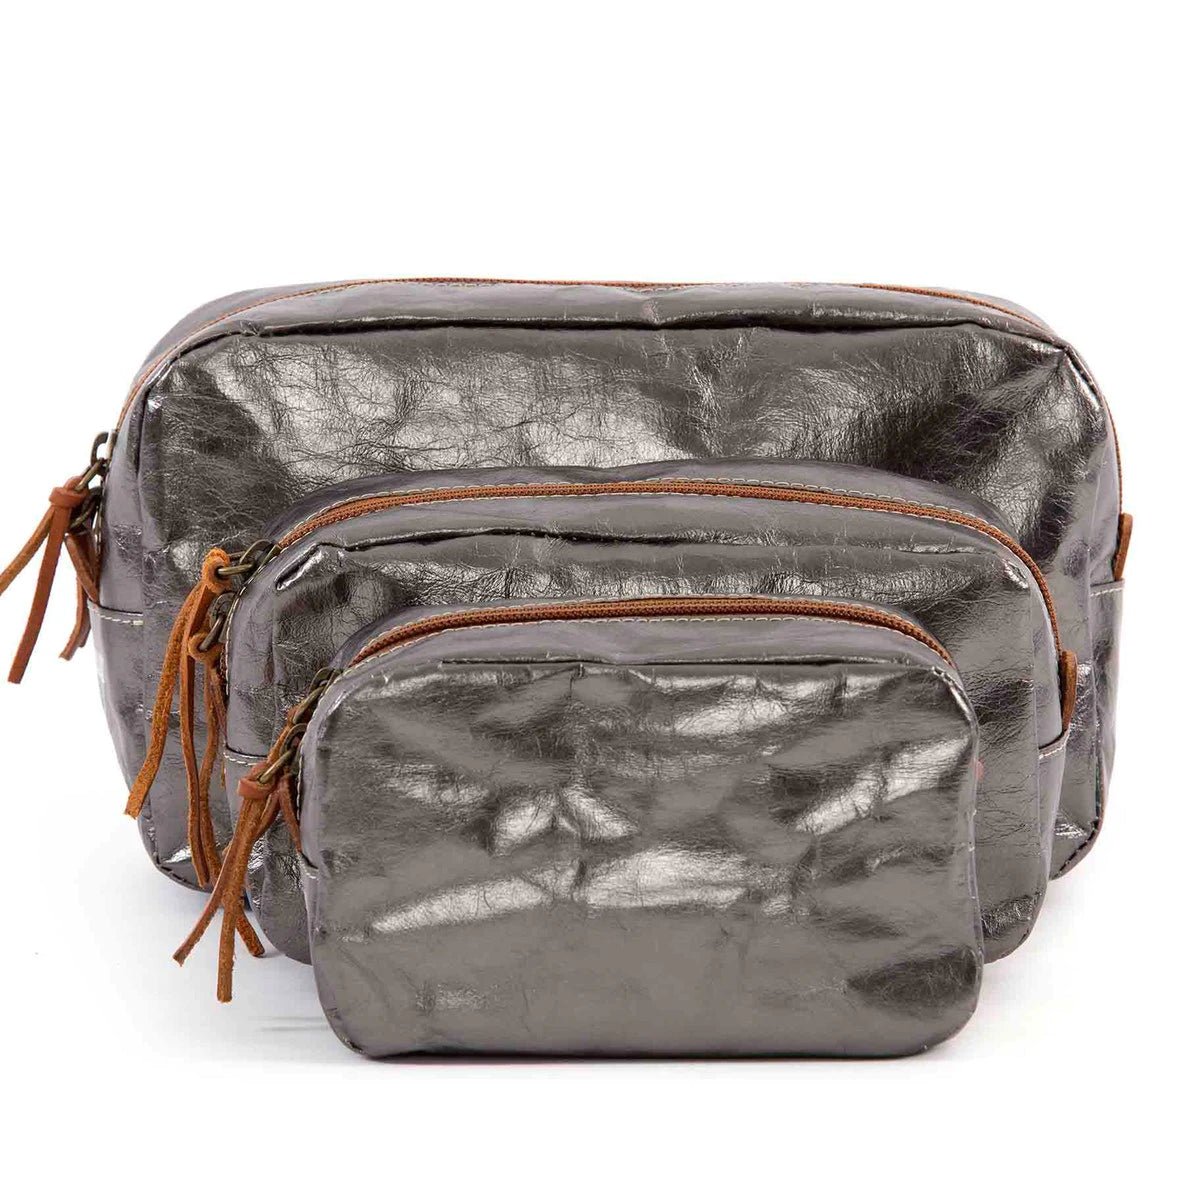 A set of three washable paper toiletry bags is shown. Each bag has a brown zip with a tan leather zip pull. The smallest bag is at the front, then the medium bag and the large size at the back. The bags shown are dark grey metallic in colour.